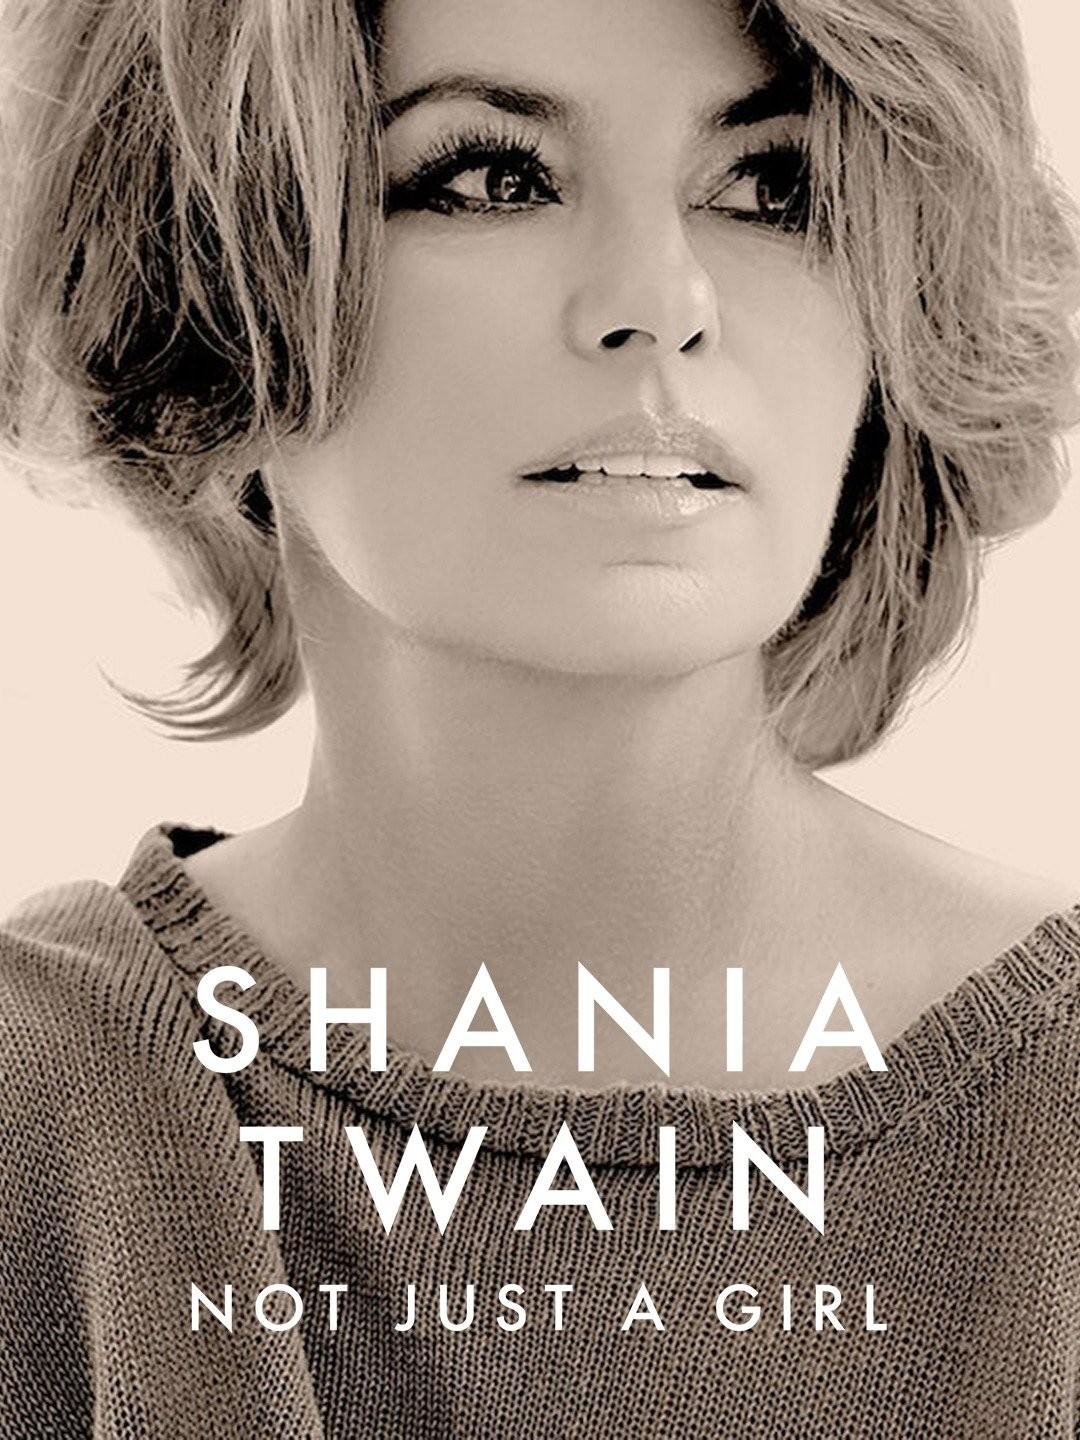 Promotional poster for "Shania Twain: Not Just a Girl." (Netflix)